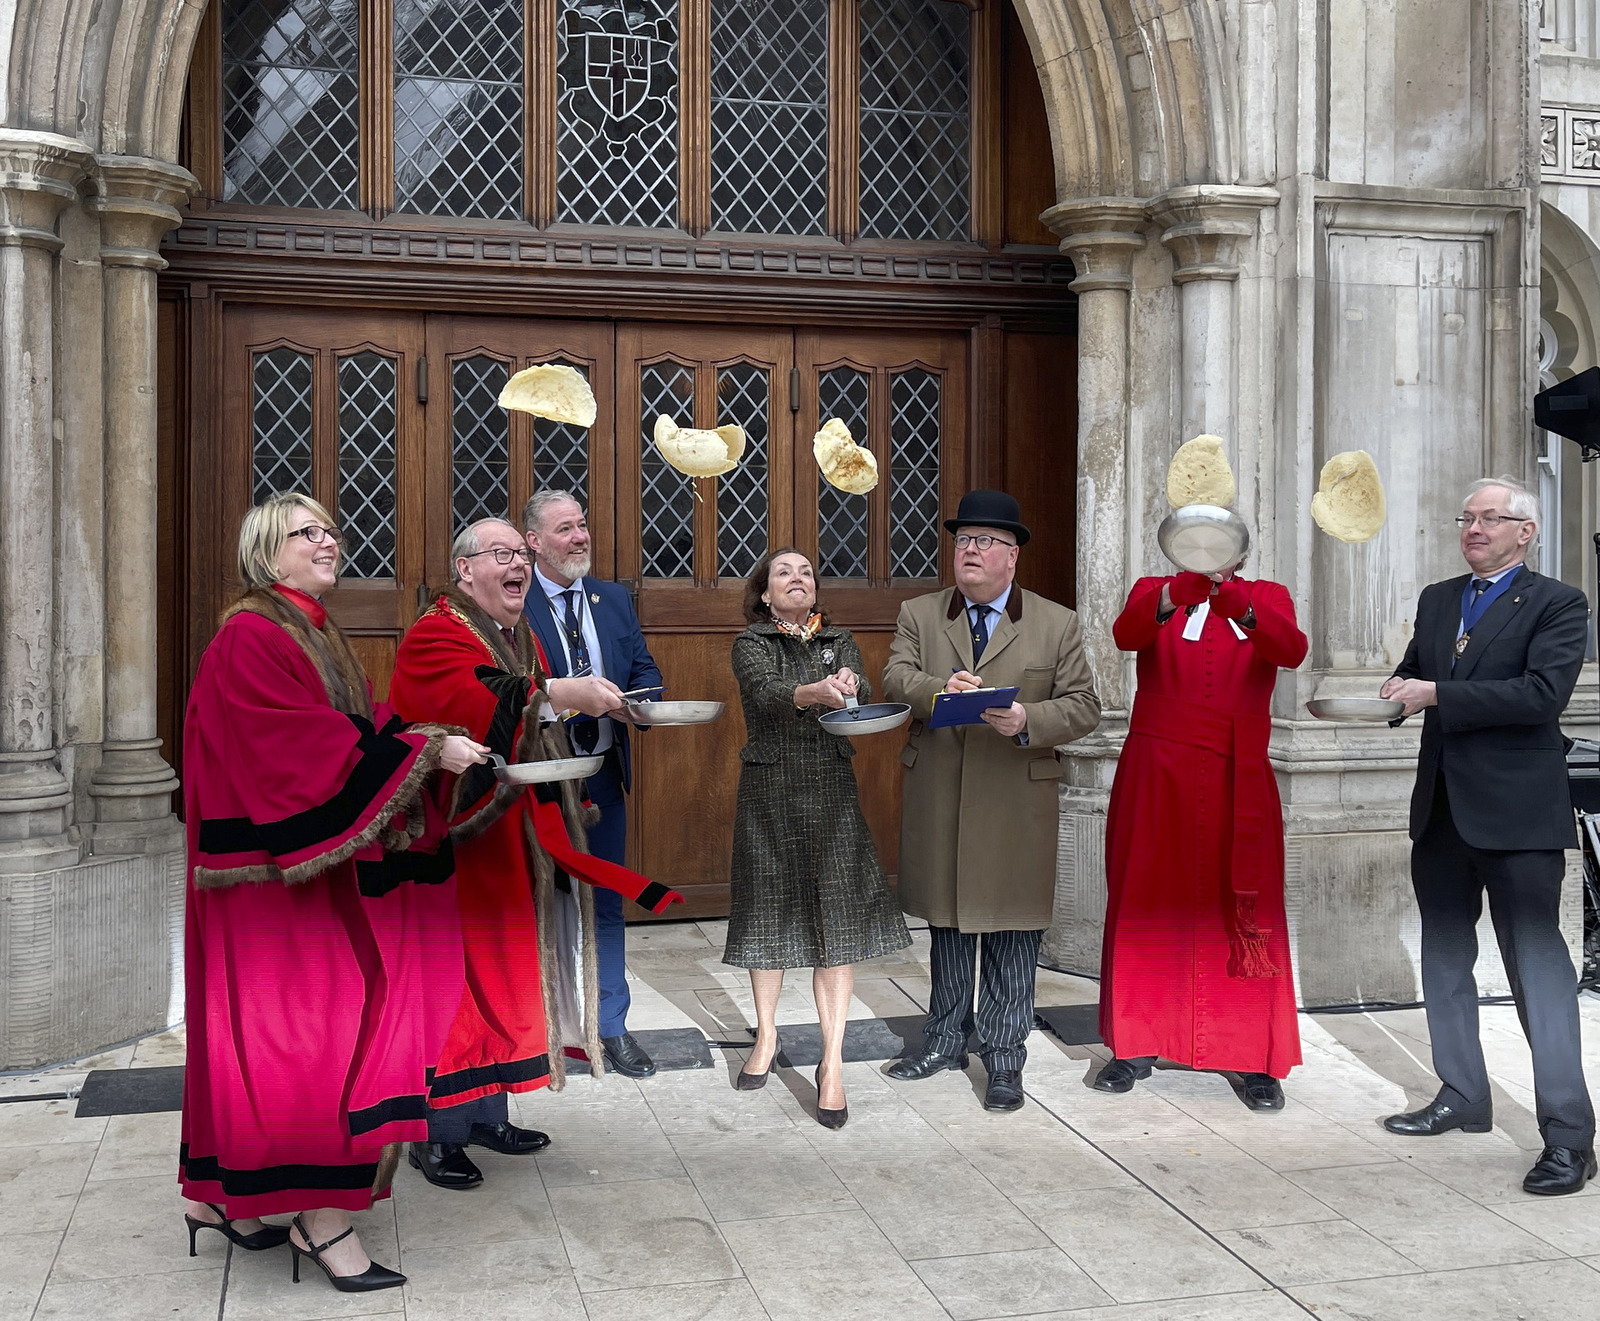 21 Feb 23 - Delighted to open the 19th Livery Pancake at Guildhall Yard held in aid of the Lord Mayor’s Appeal and the Poulter’s Charity - photo taken by our Liveryman, photographer Ben Broomfield 